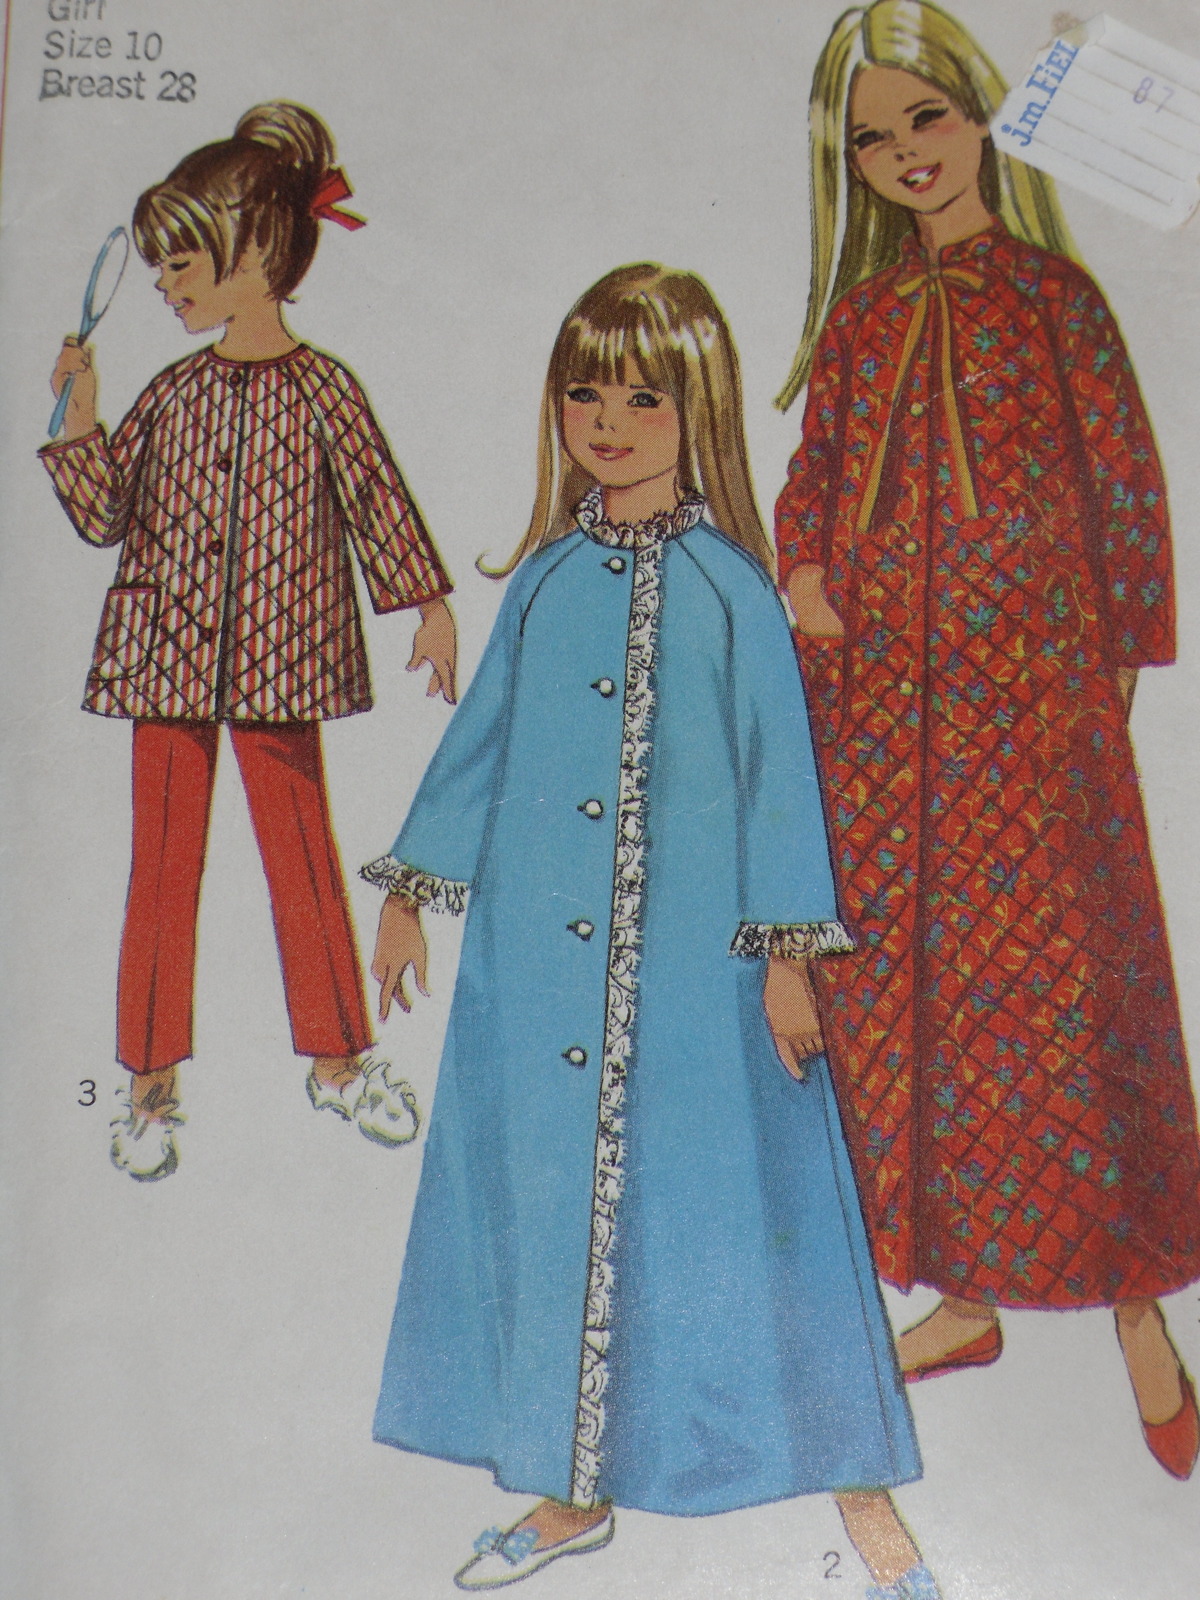 Primary image for Simplicity Pattern 7371 Girls' Robe, Pajama Top & Pants Size 10 Vintage 1960's